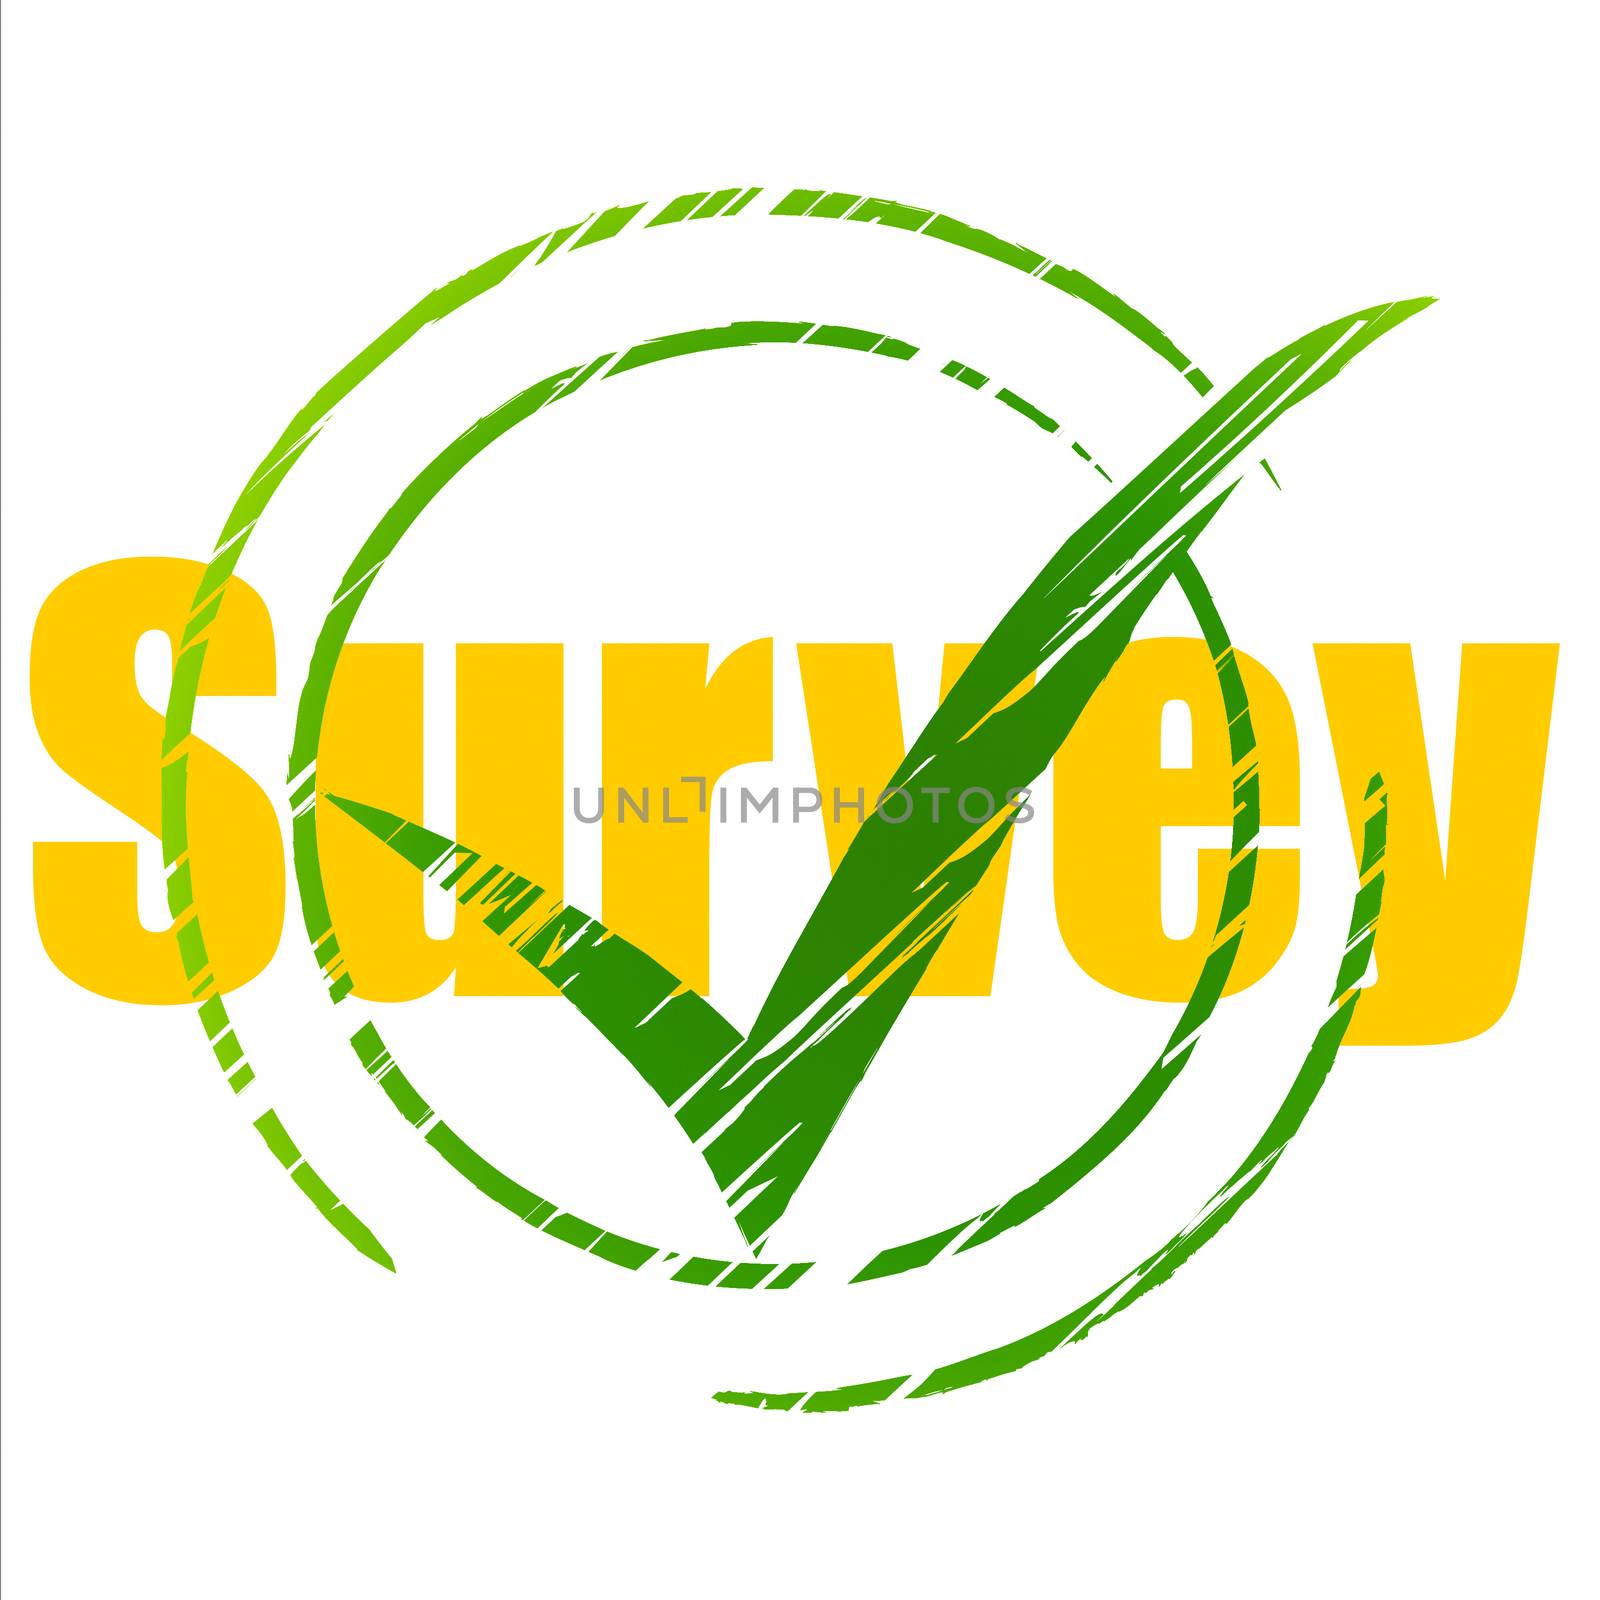 Tick Survey Represents Yes Checkmark And Assessing by stuartmiles